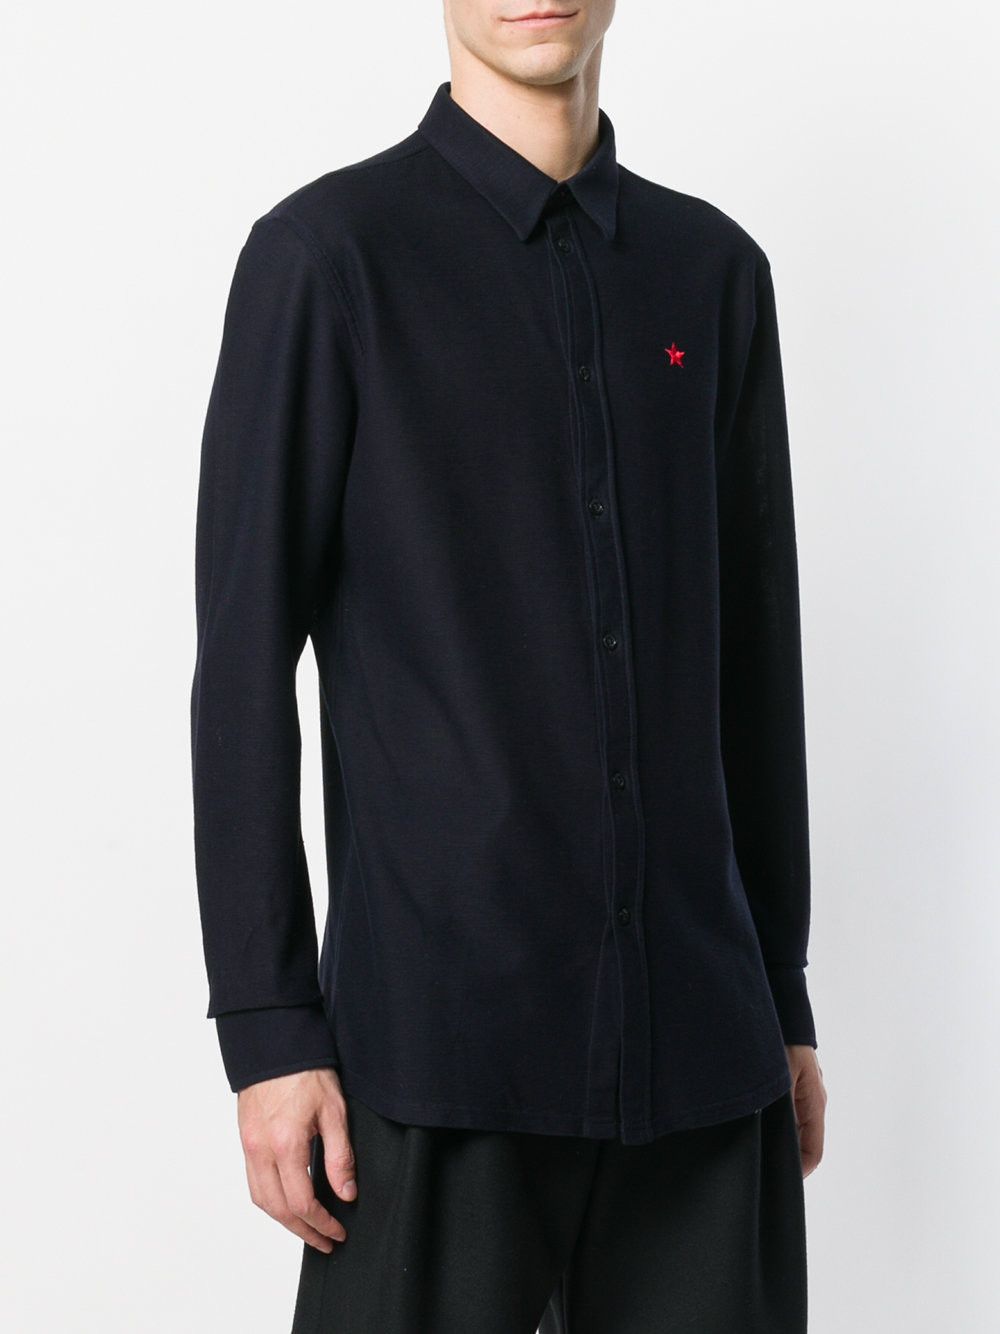 Givenchy Star-embroidery shirt | Grailed